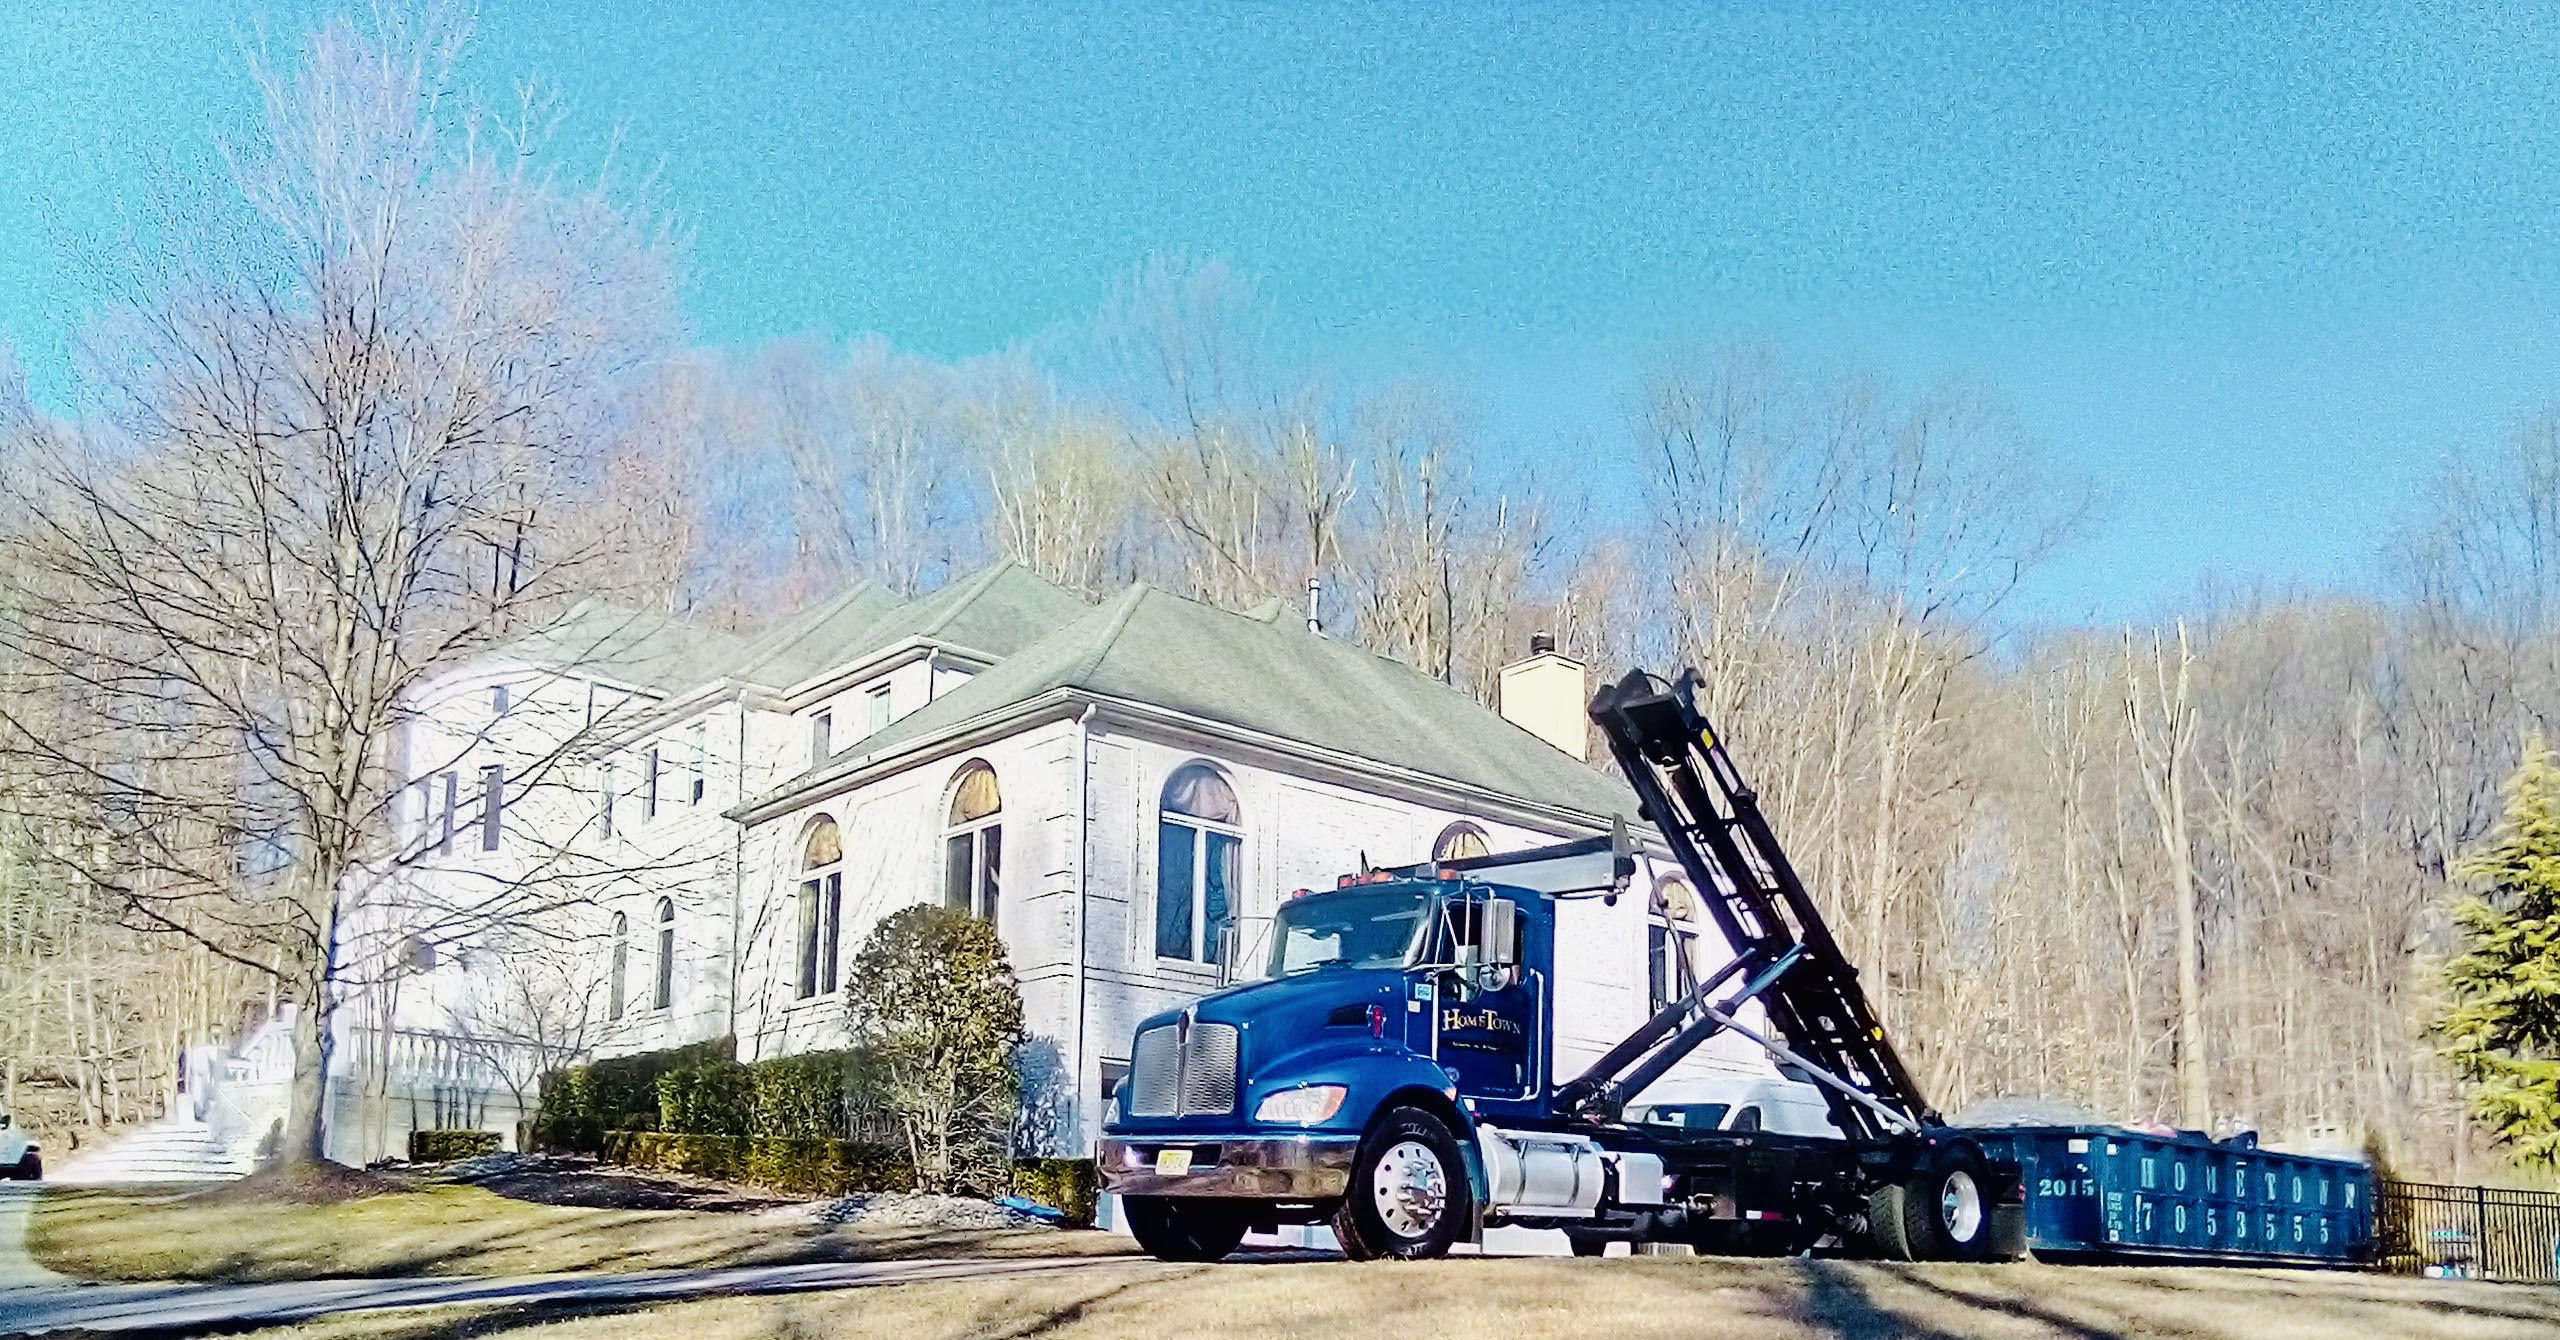 Dumpster unloading at new jersey home